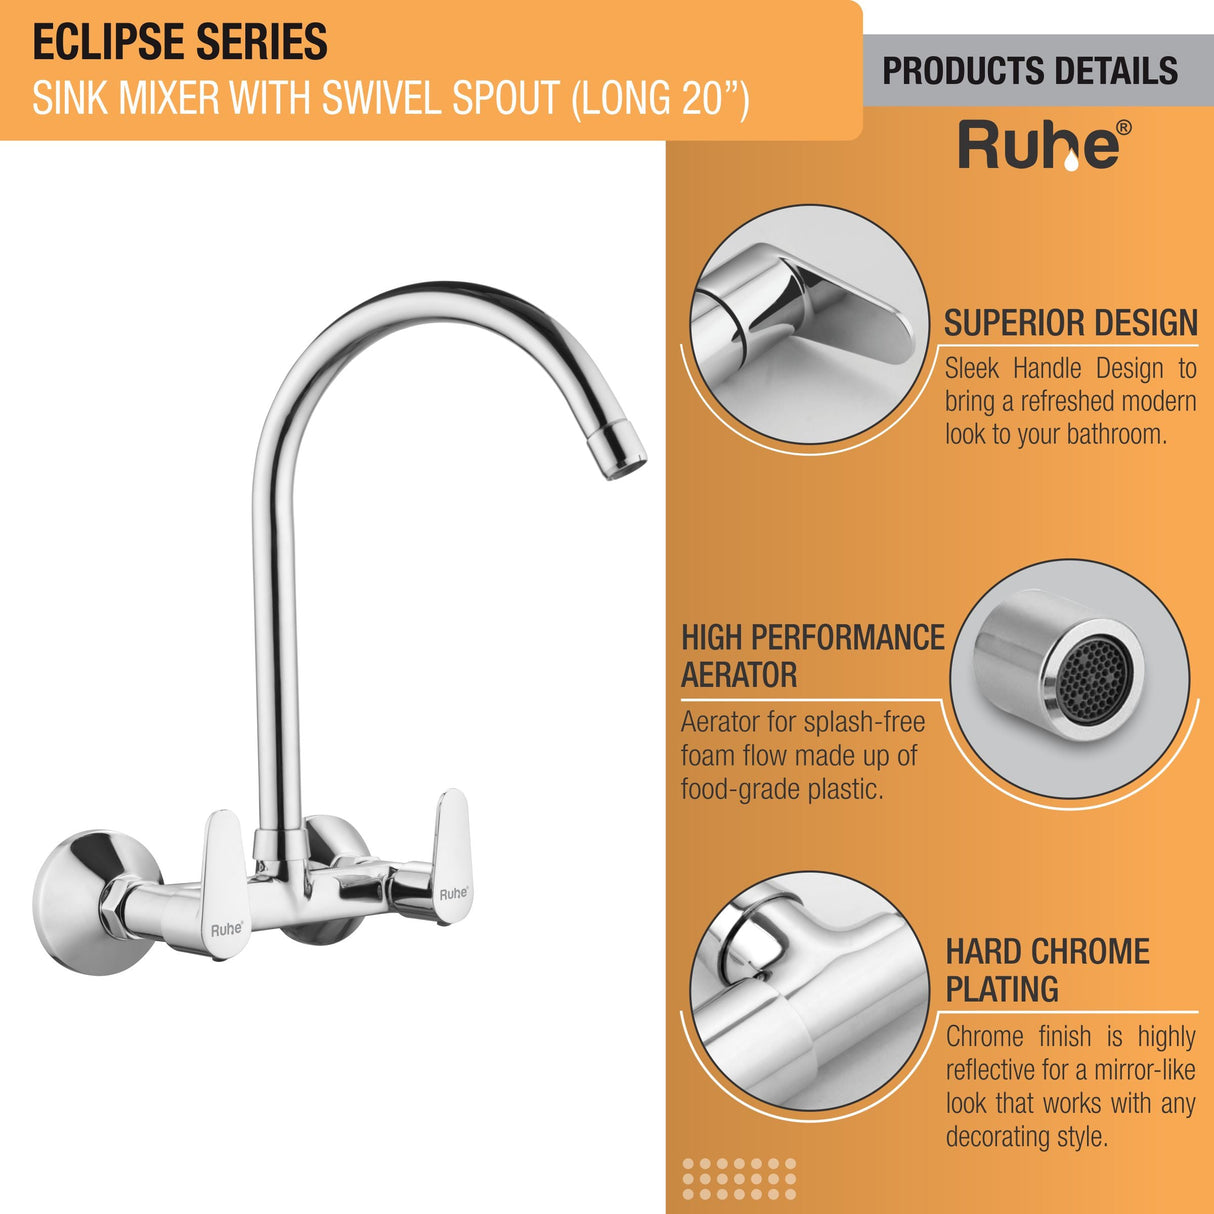 Eclipse Sink Mixer with Large (20 inches) Round Swivel Spout Faucet product details